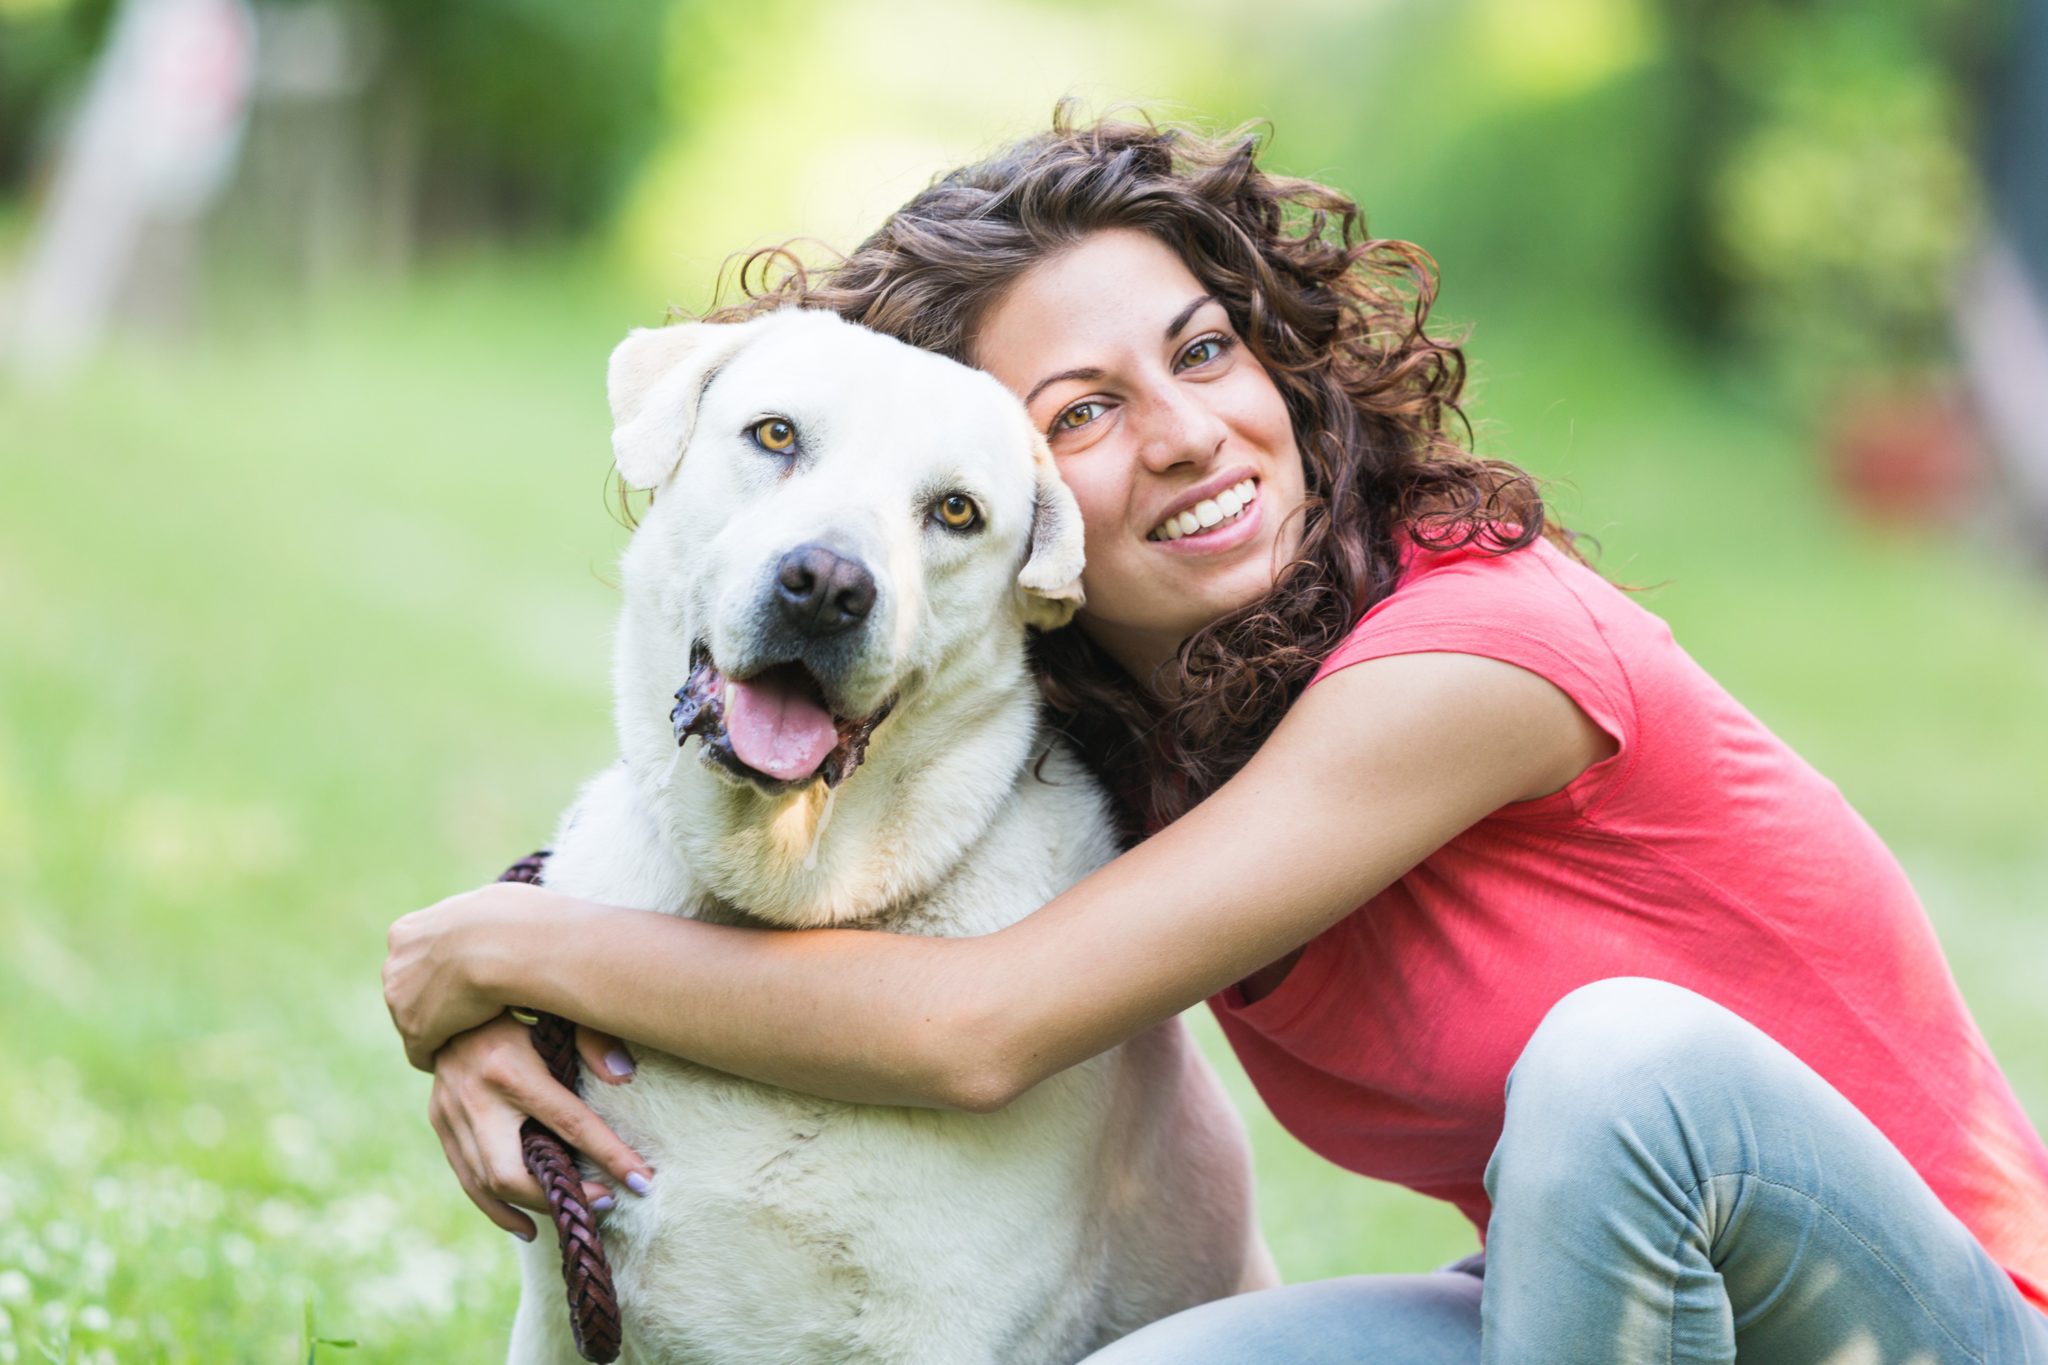 19 Life Lessons We Can Learn from a Dog - Aspire Magazine